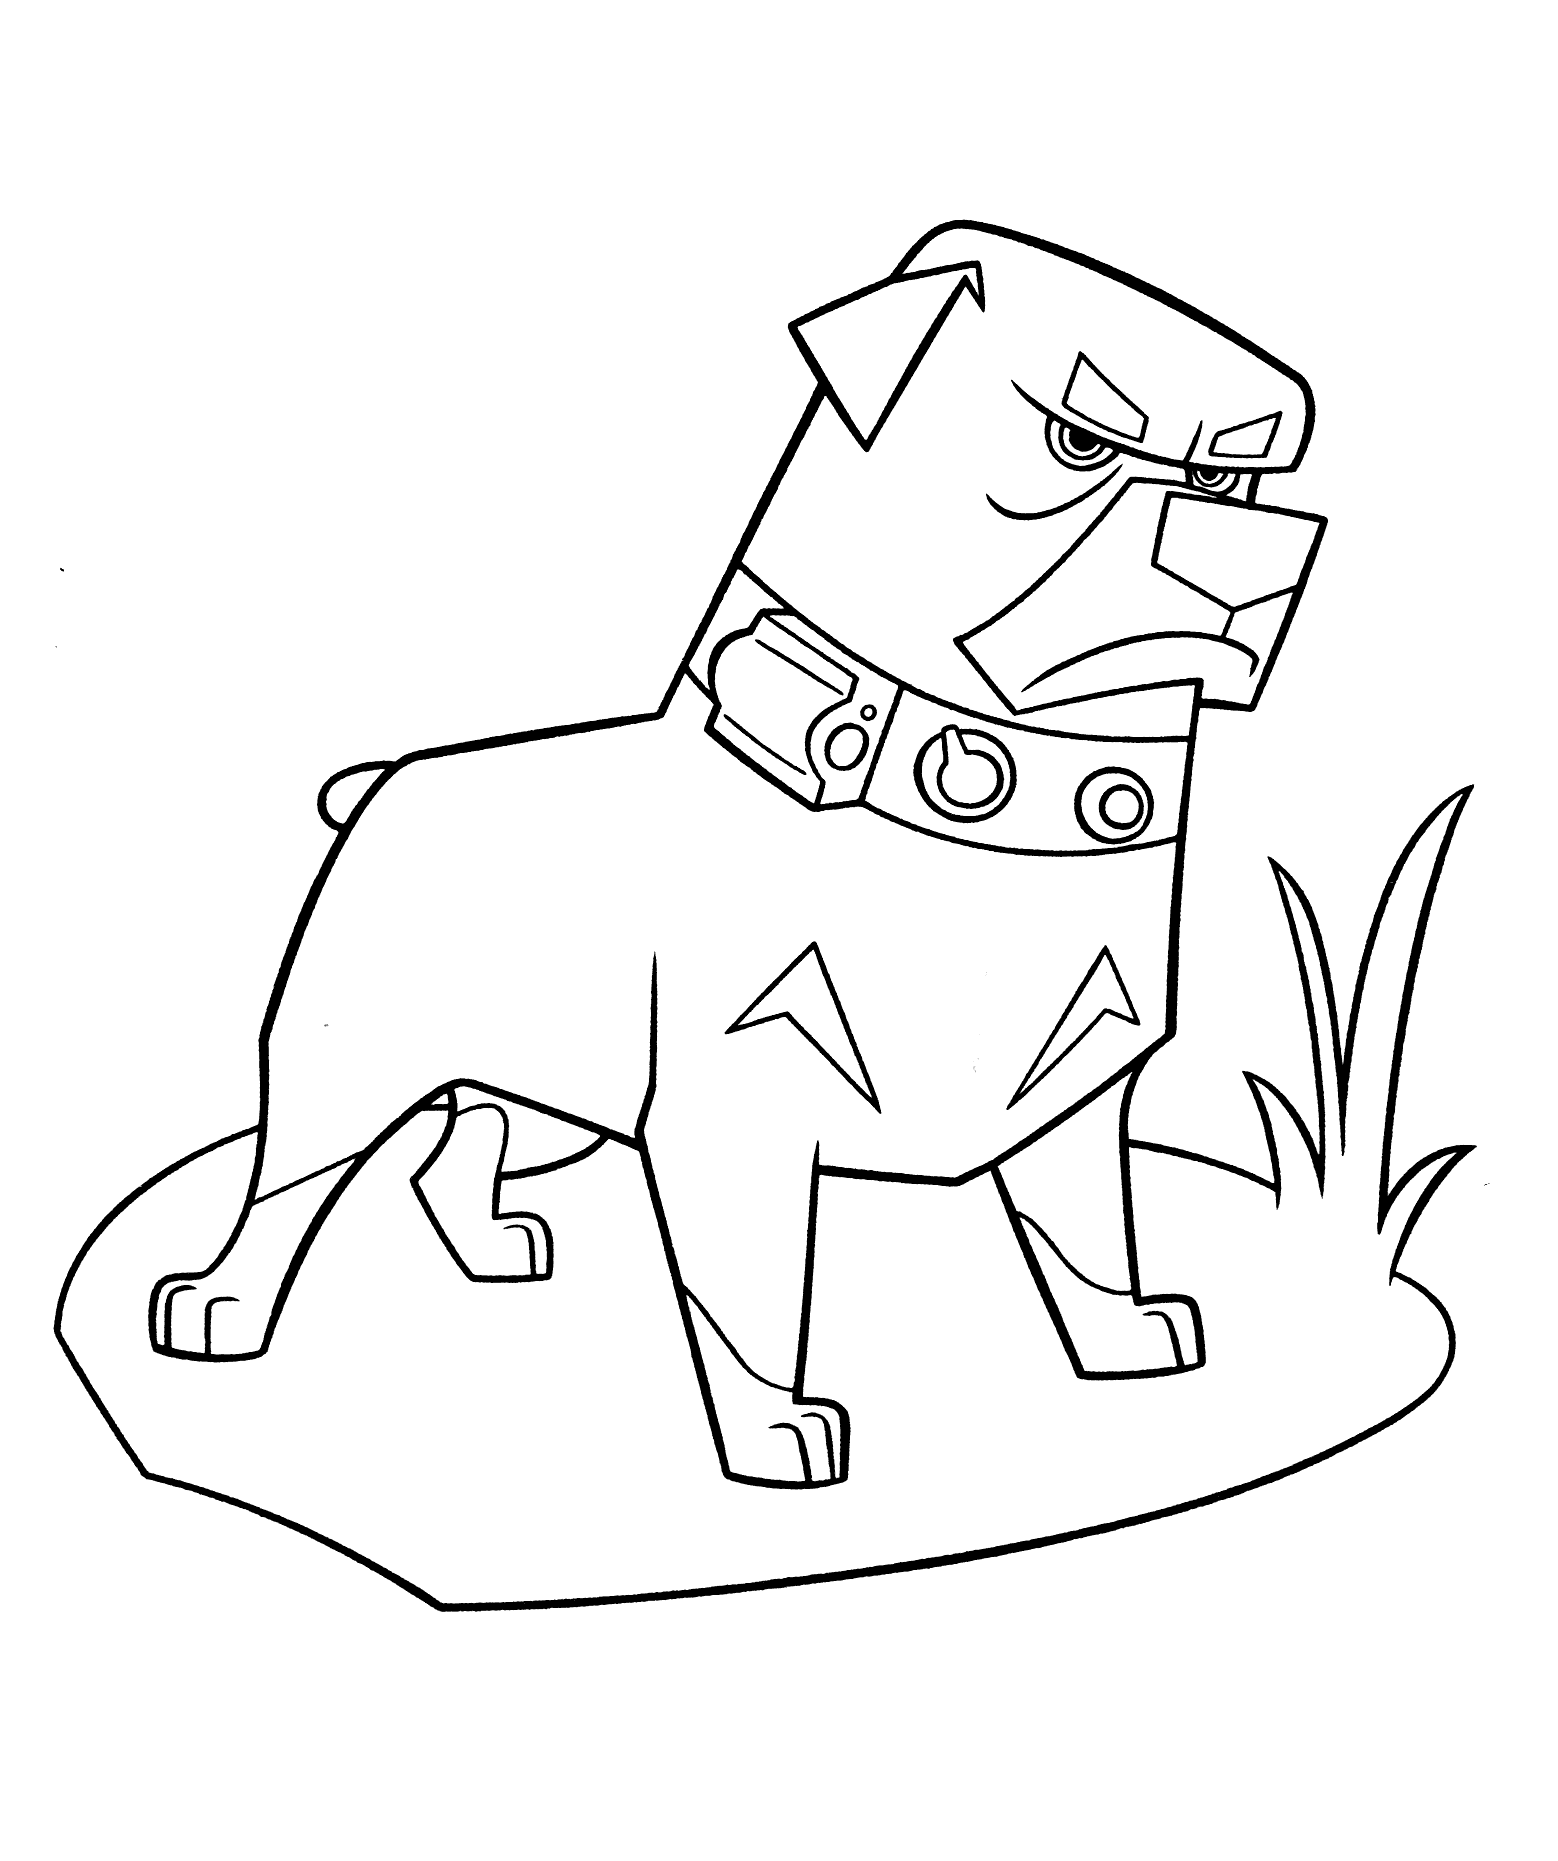 Coloring page - Angry dog